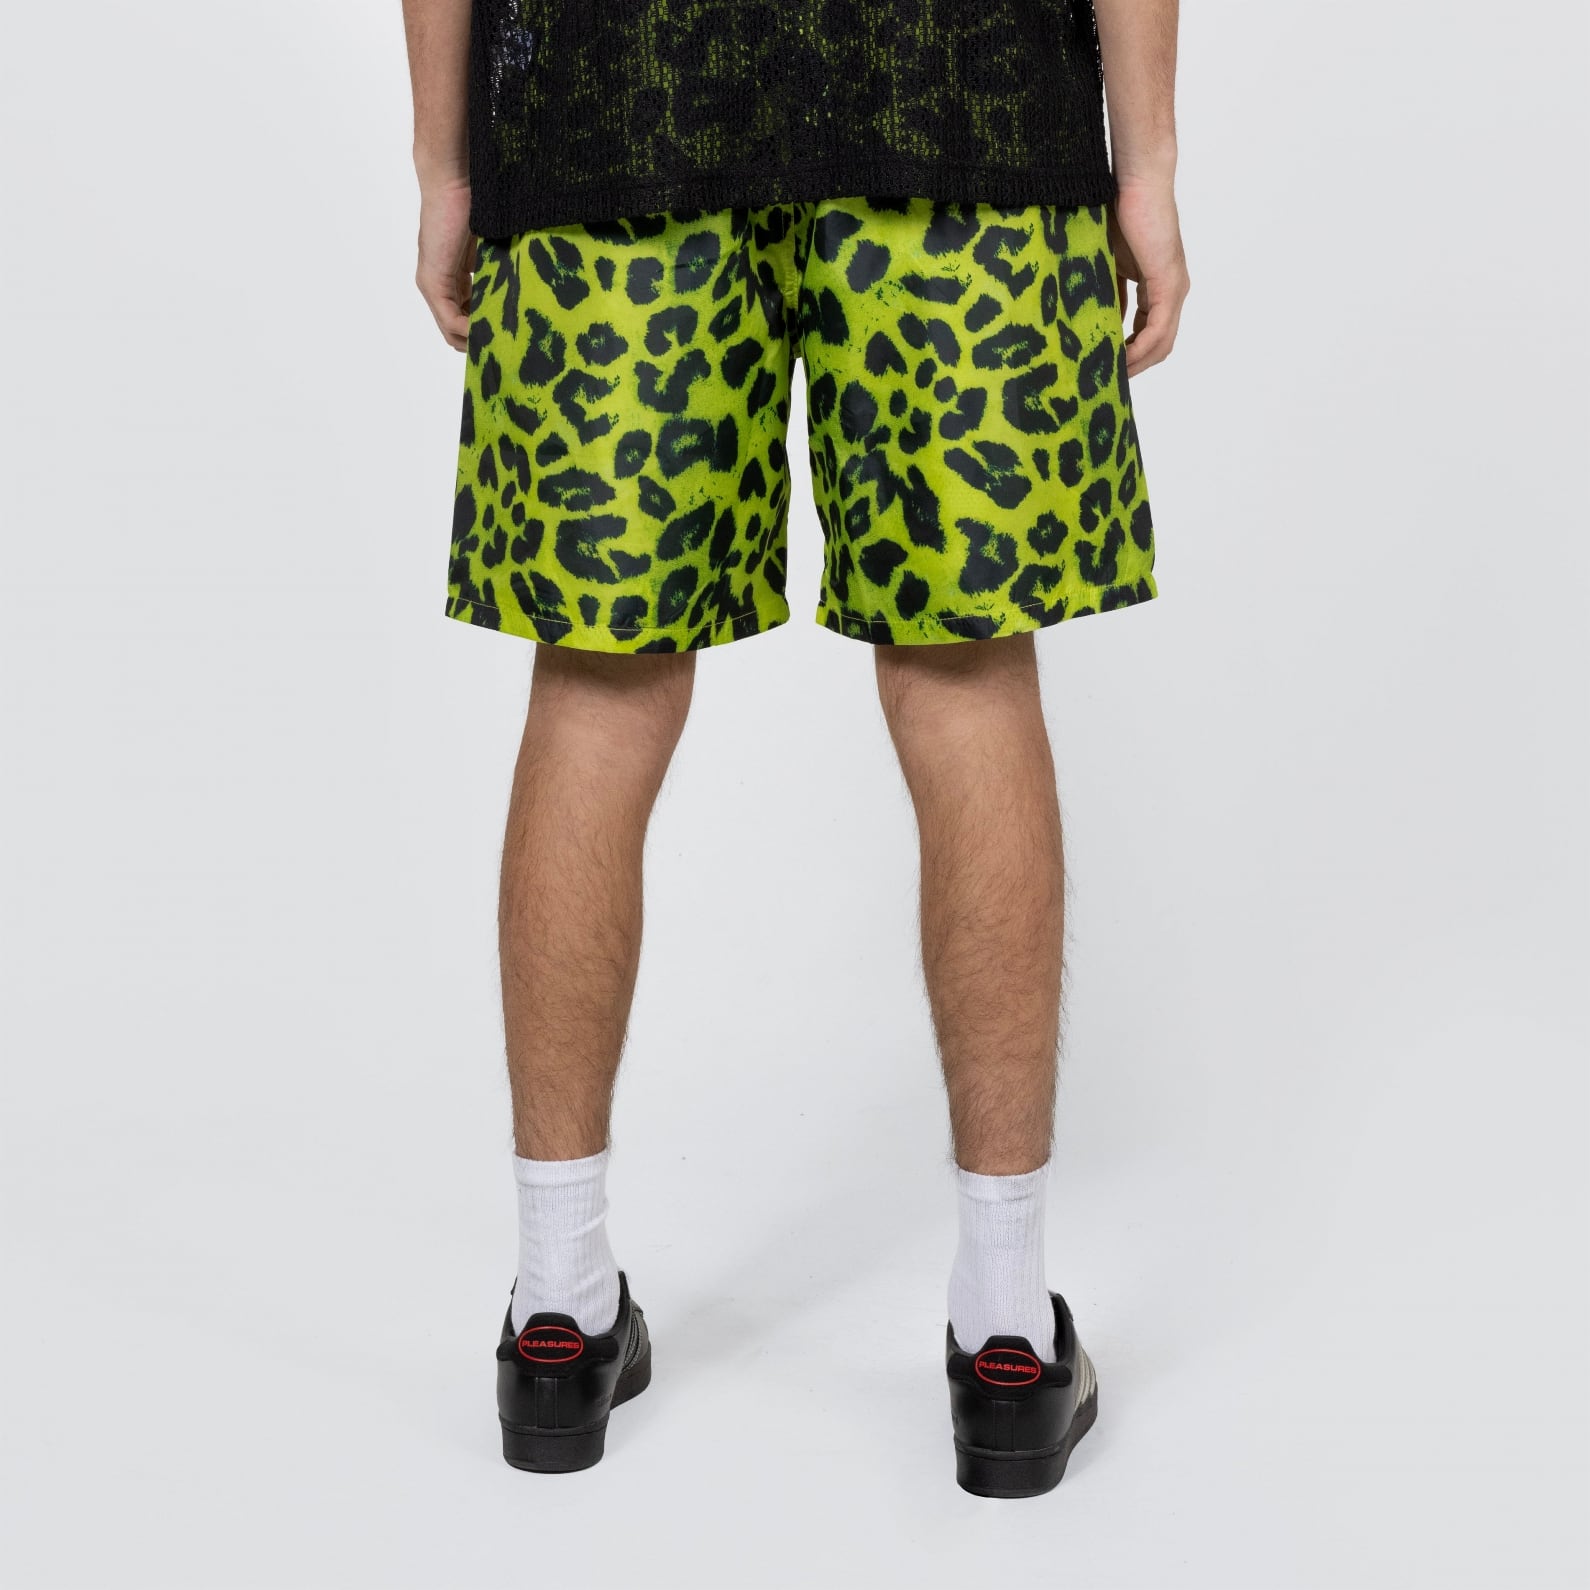 【PLEASURES/プレジャーズ】LEOPARD RUNNING SHORT ショートパンツ / LIME グリーン | AnKnOWn LAB  powered by BASE